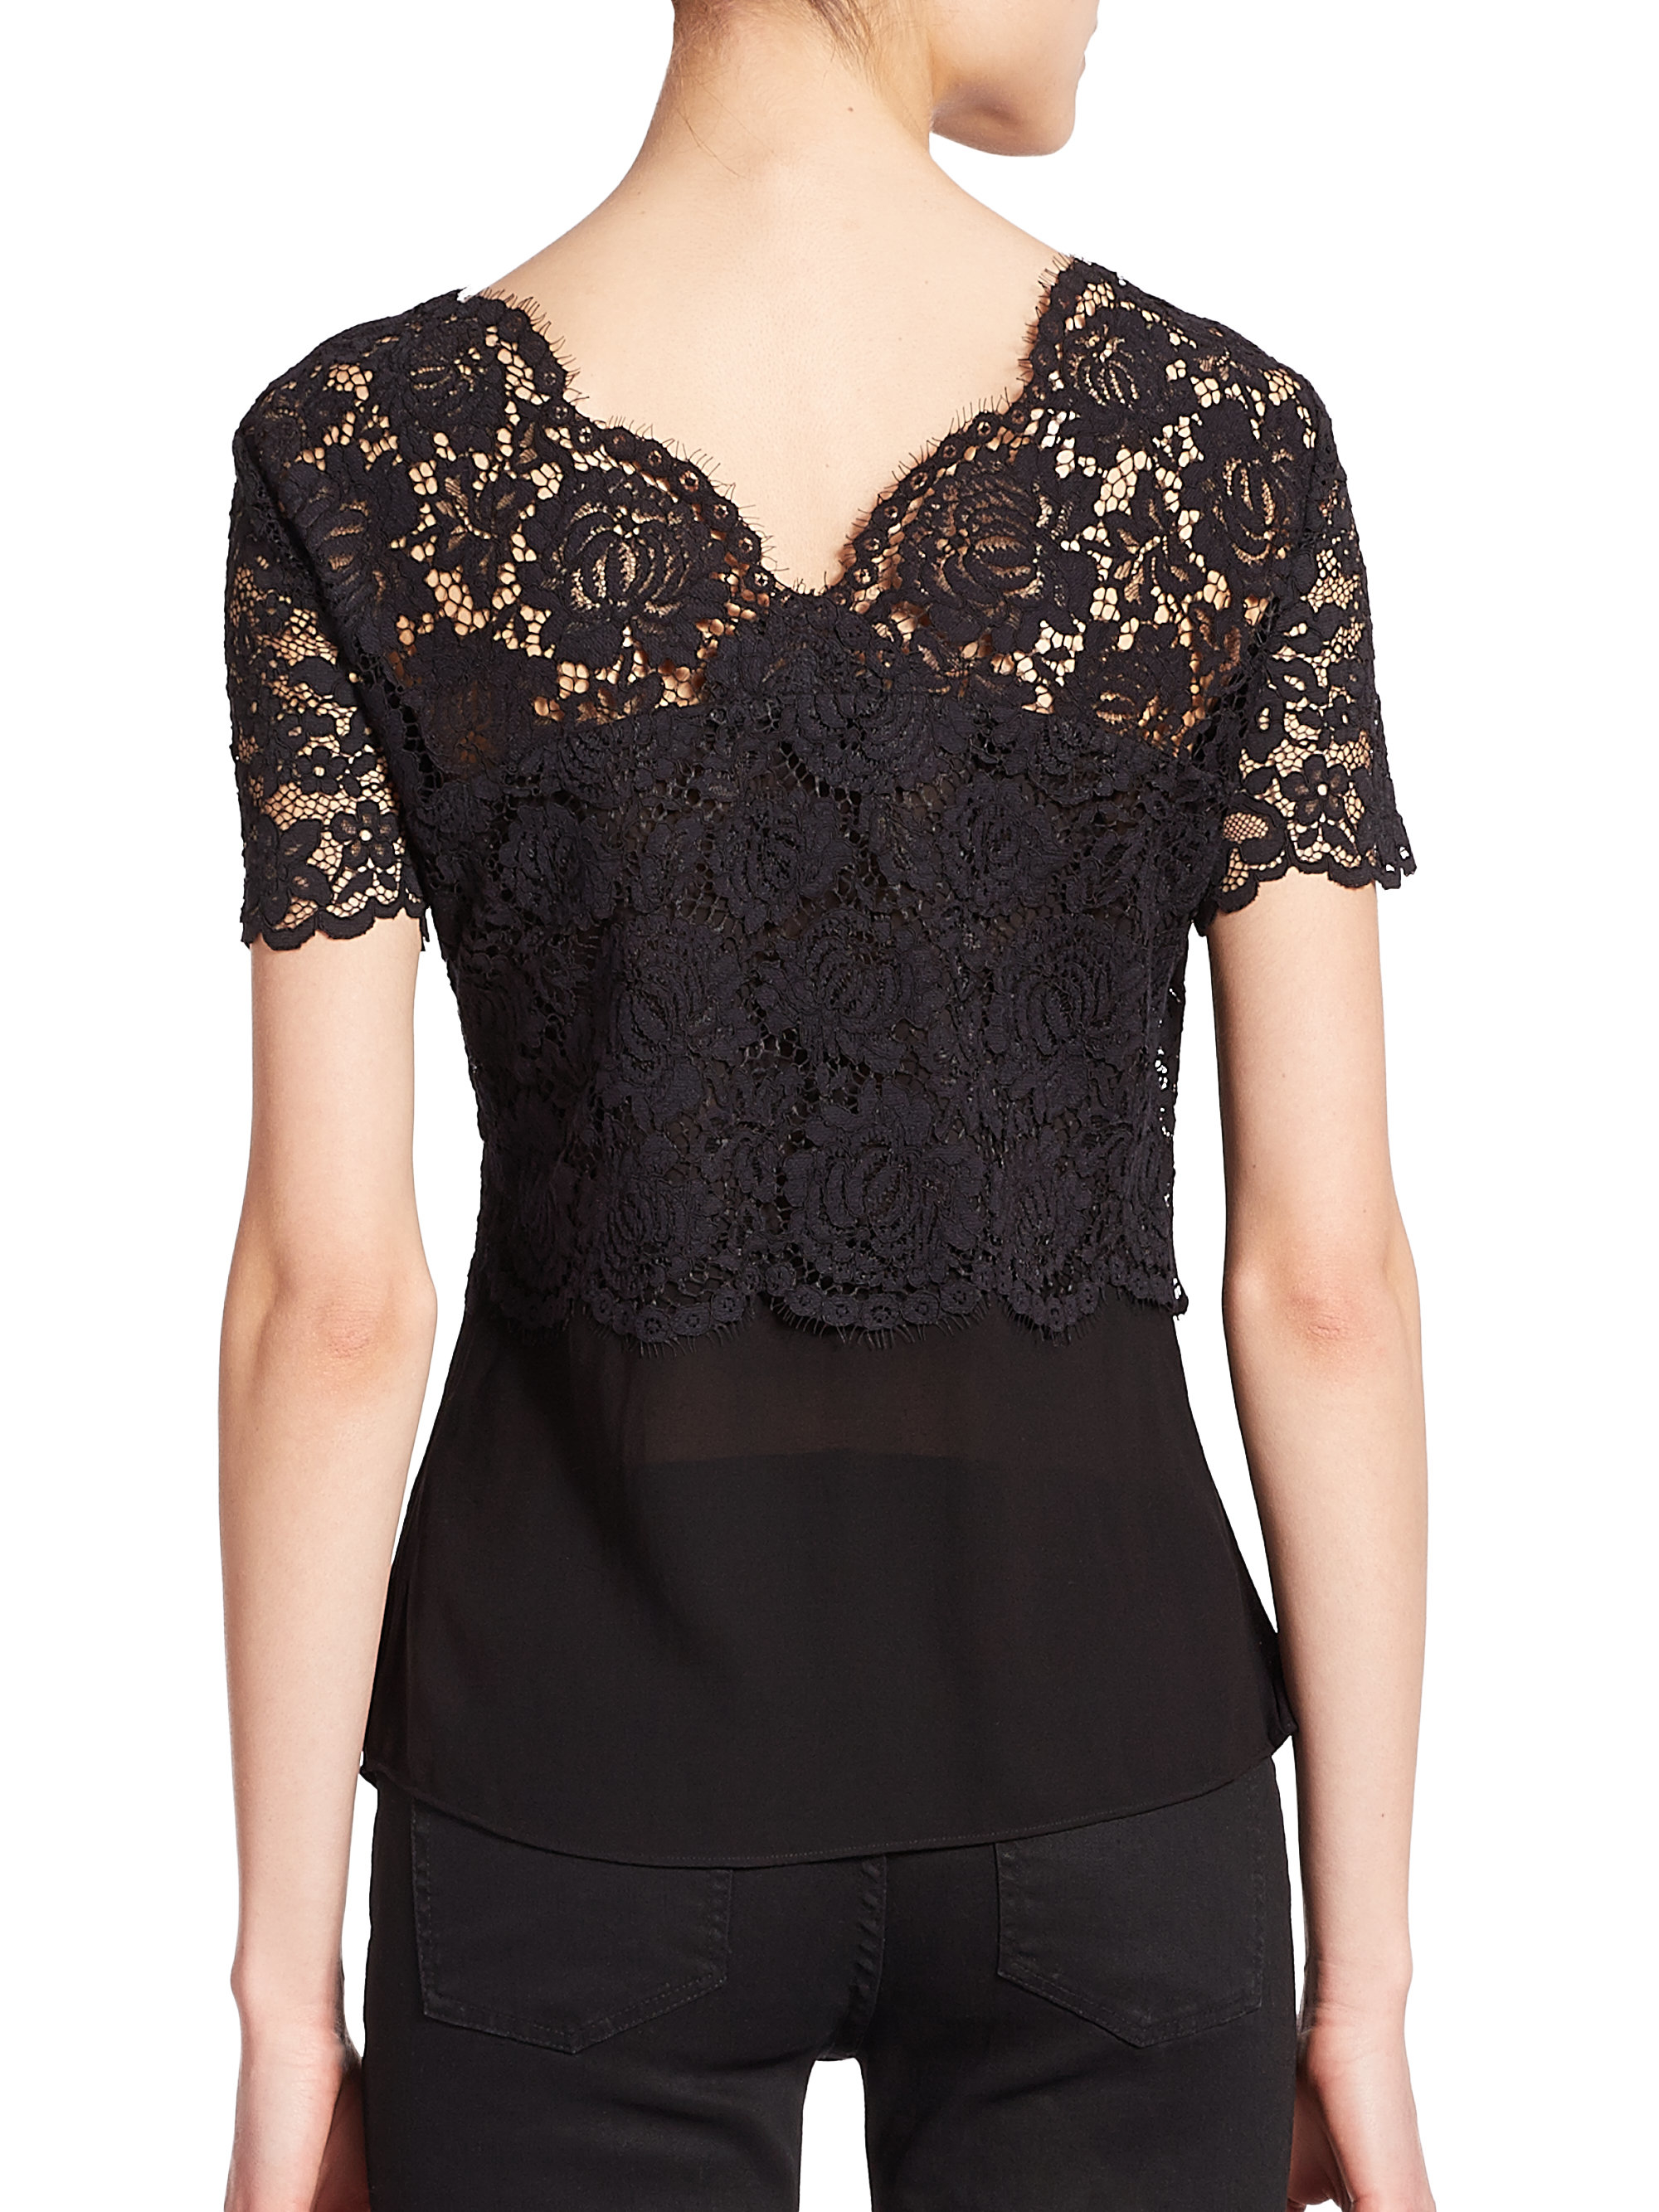 Lyst - The Kooples Lace-bodice Top in Black